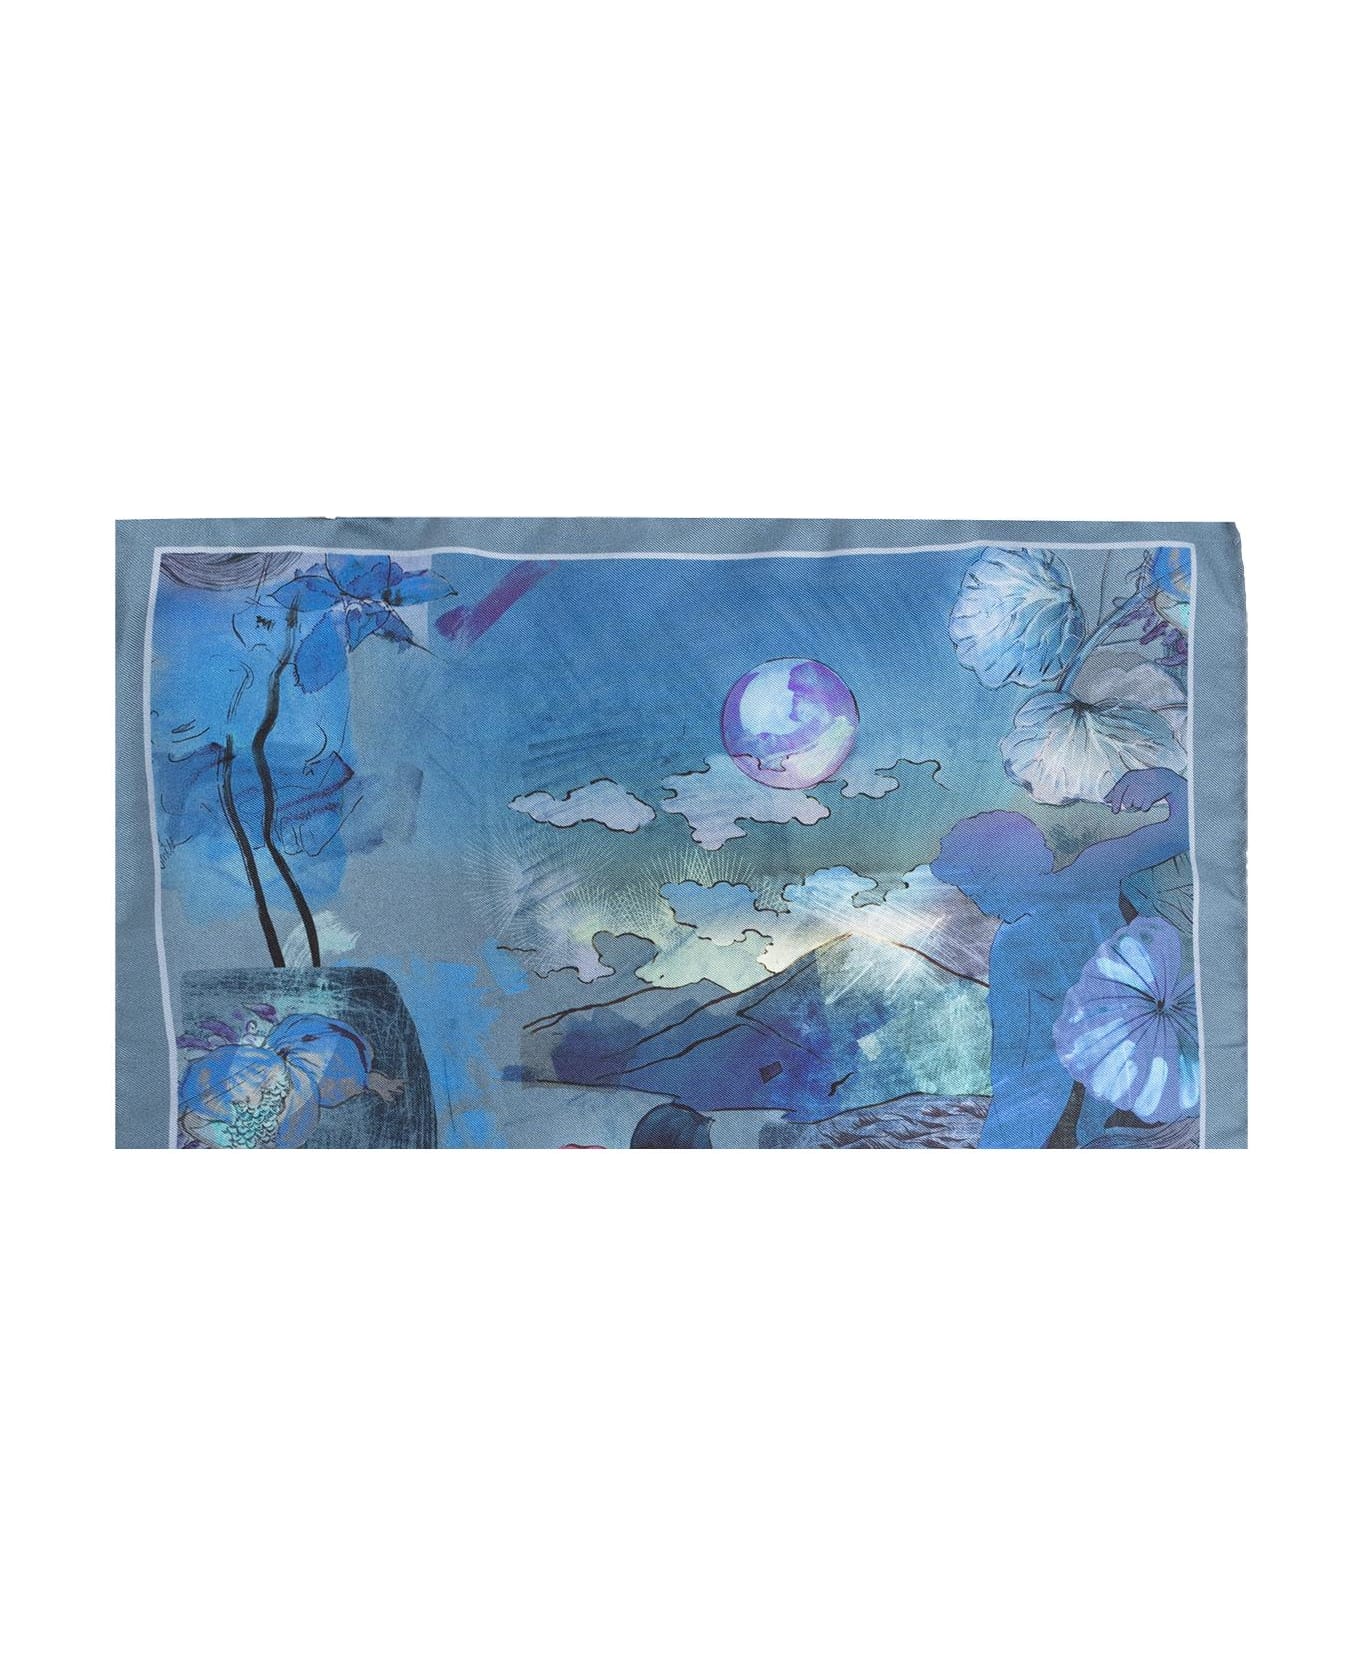 Paul Smith Silk Pocket Square - Clear Blue ネクタイ